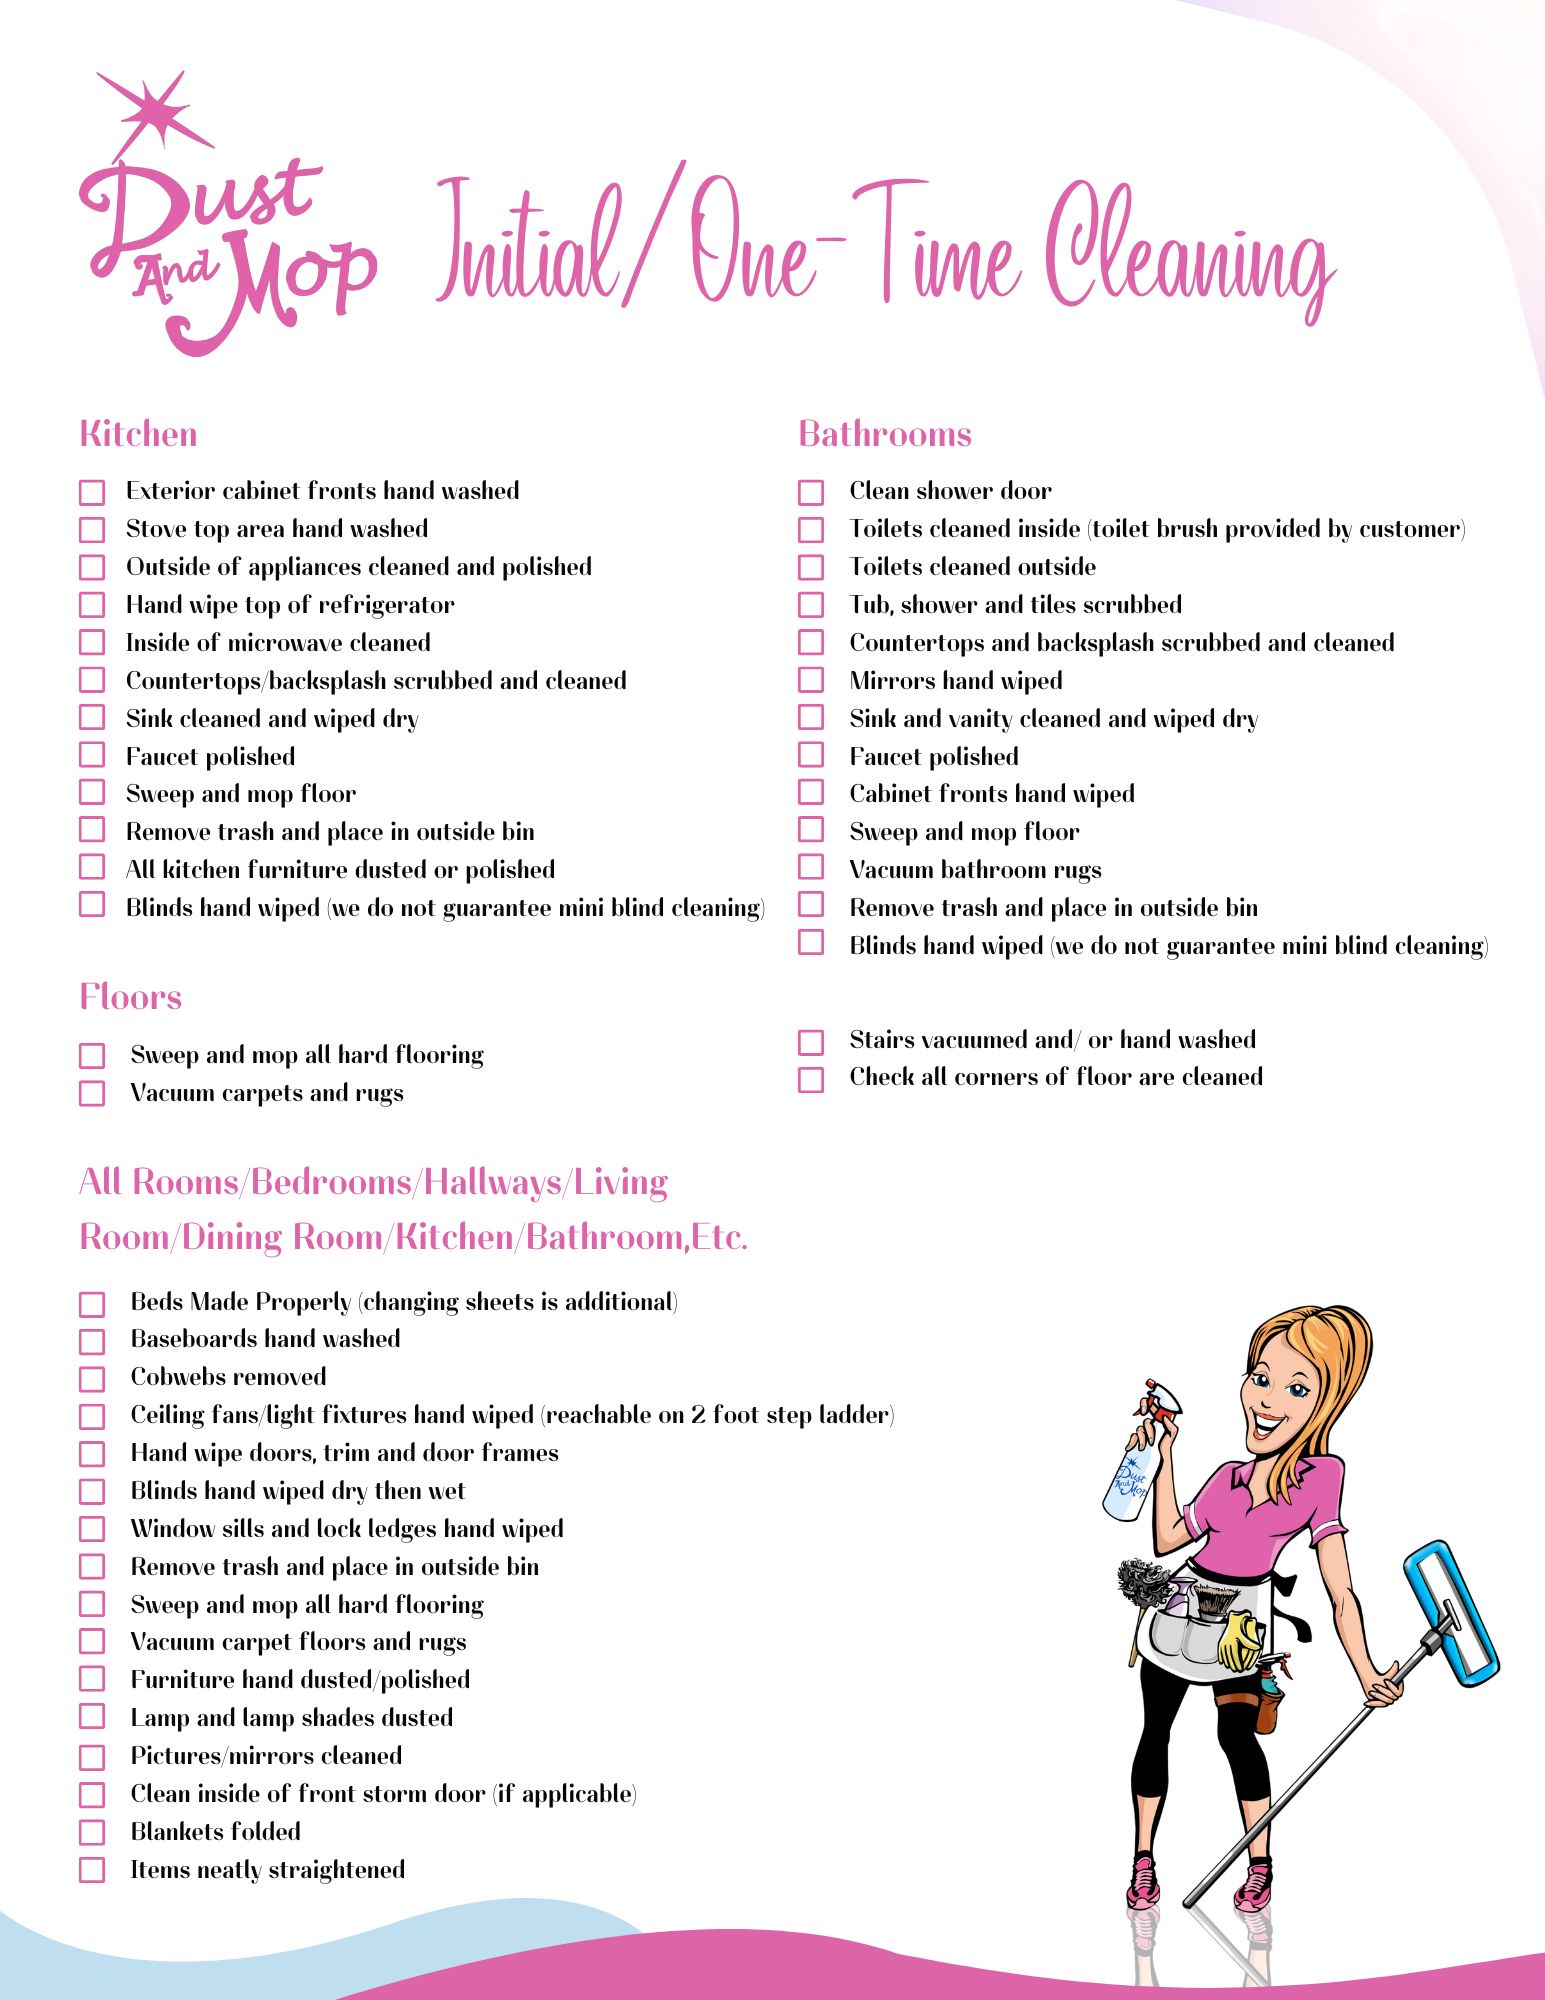 One Time House Cleaning Checklist from Dust and Mop House Cleaning